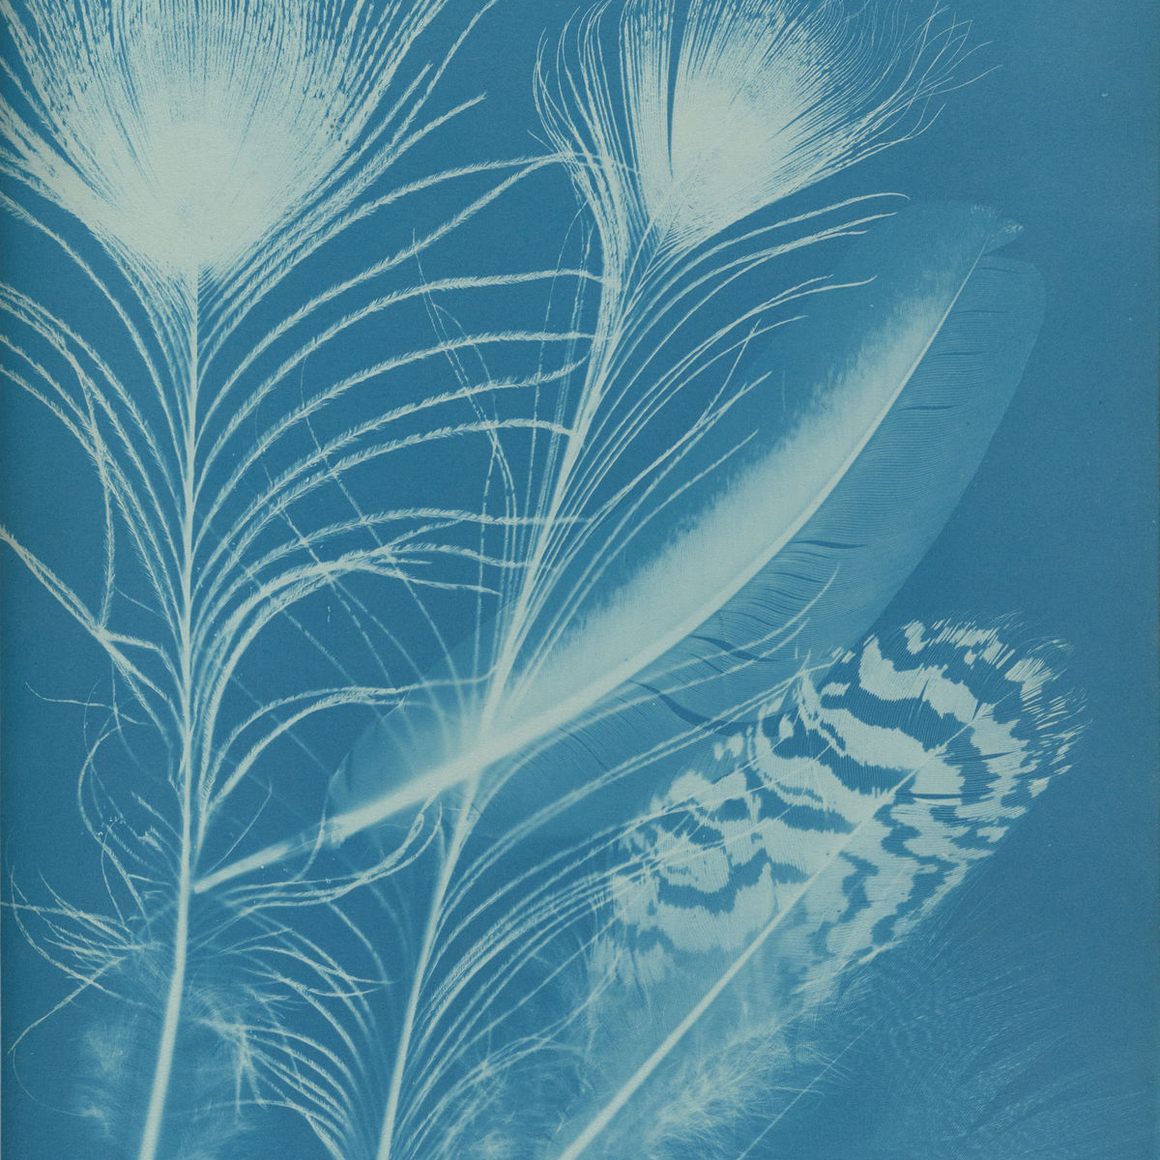 Anna Atkins and Anne Dixon, Peacock, 1861